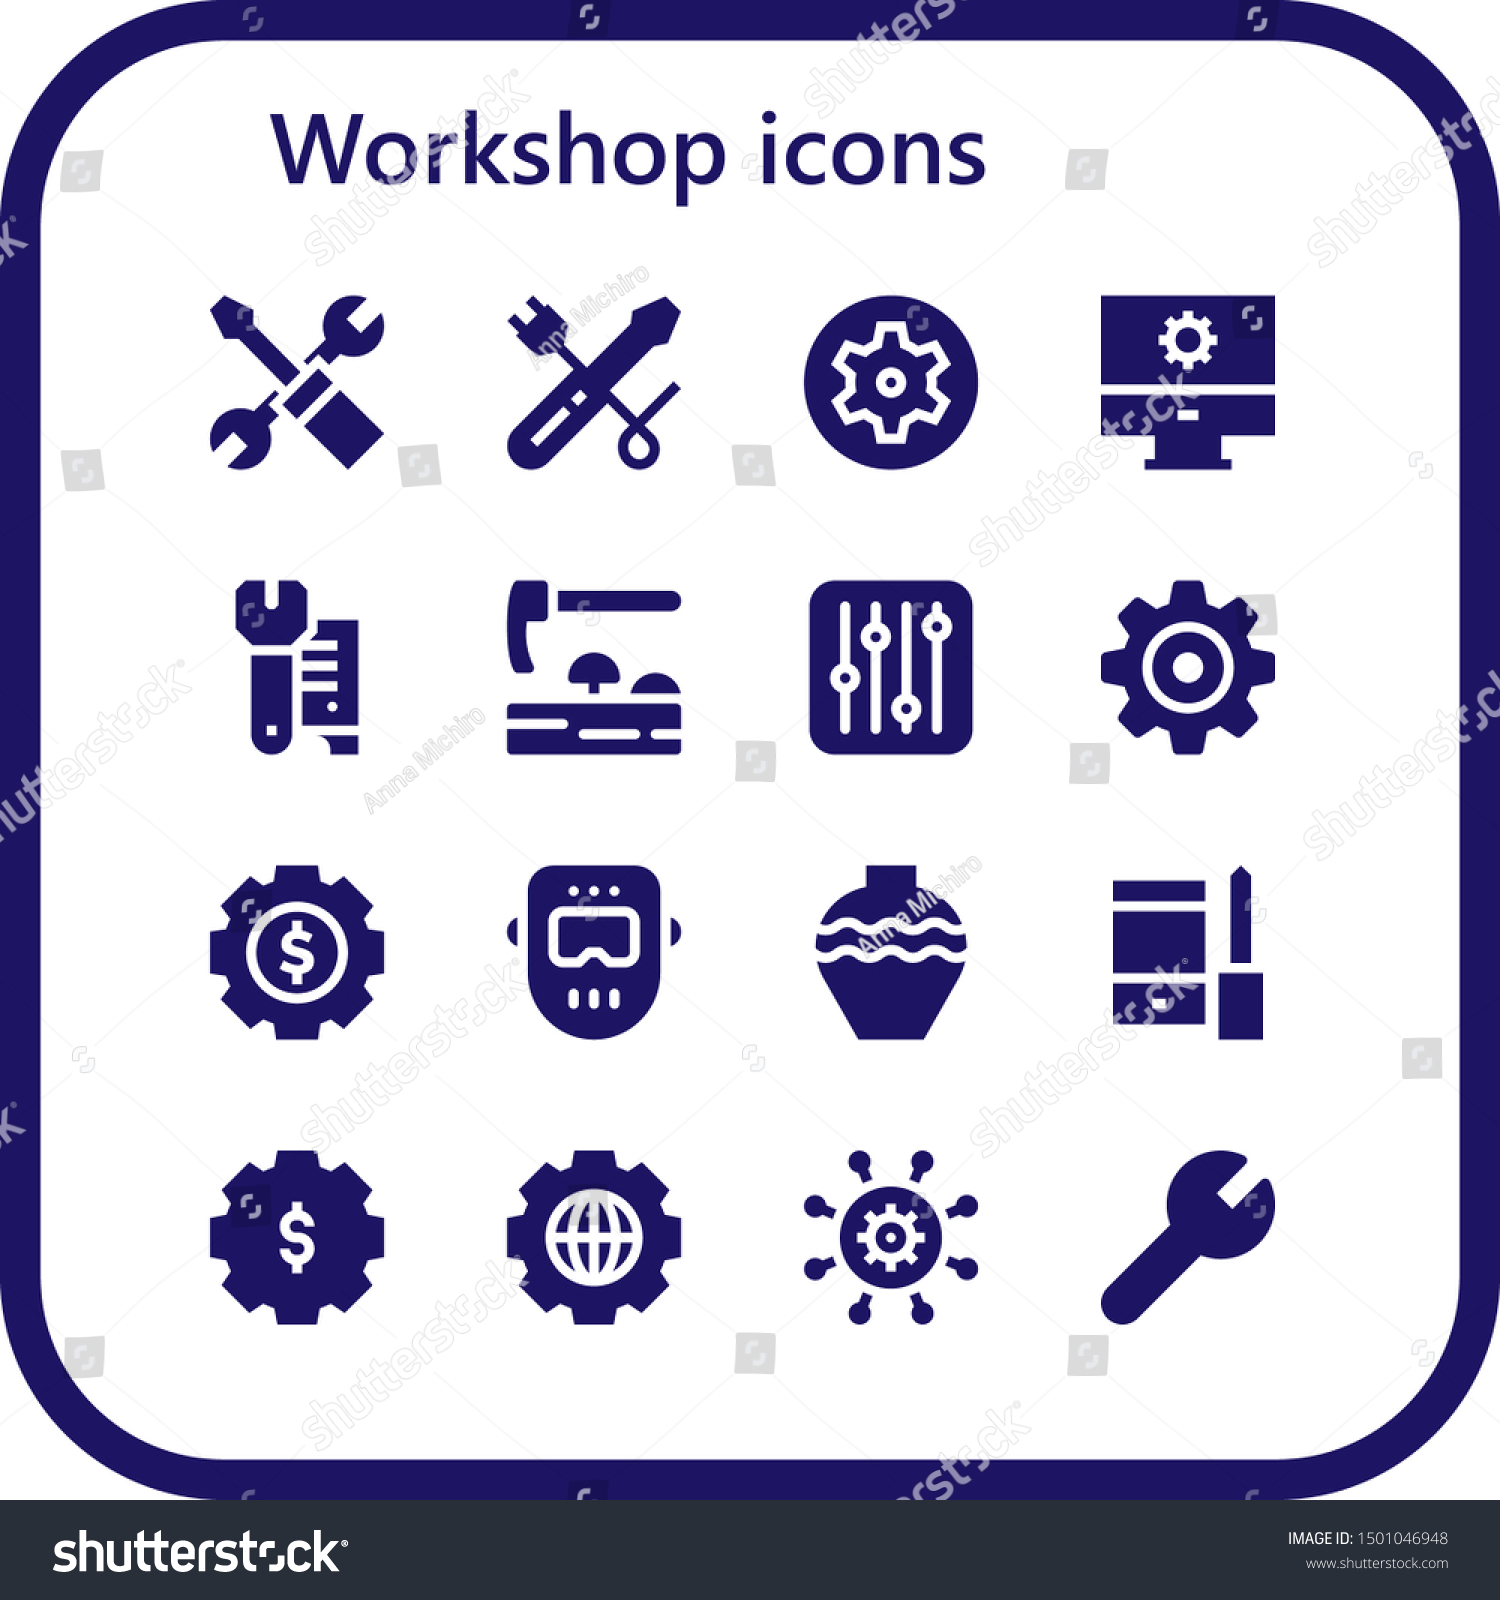 SVG of workshop icon set. 16 filled workshop icons.  Collection Of - Settings, Screwdriver, Wrench, Adze, Welder, Pottery, Configuration svg